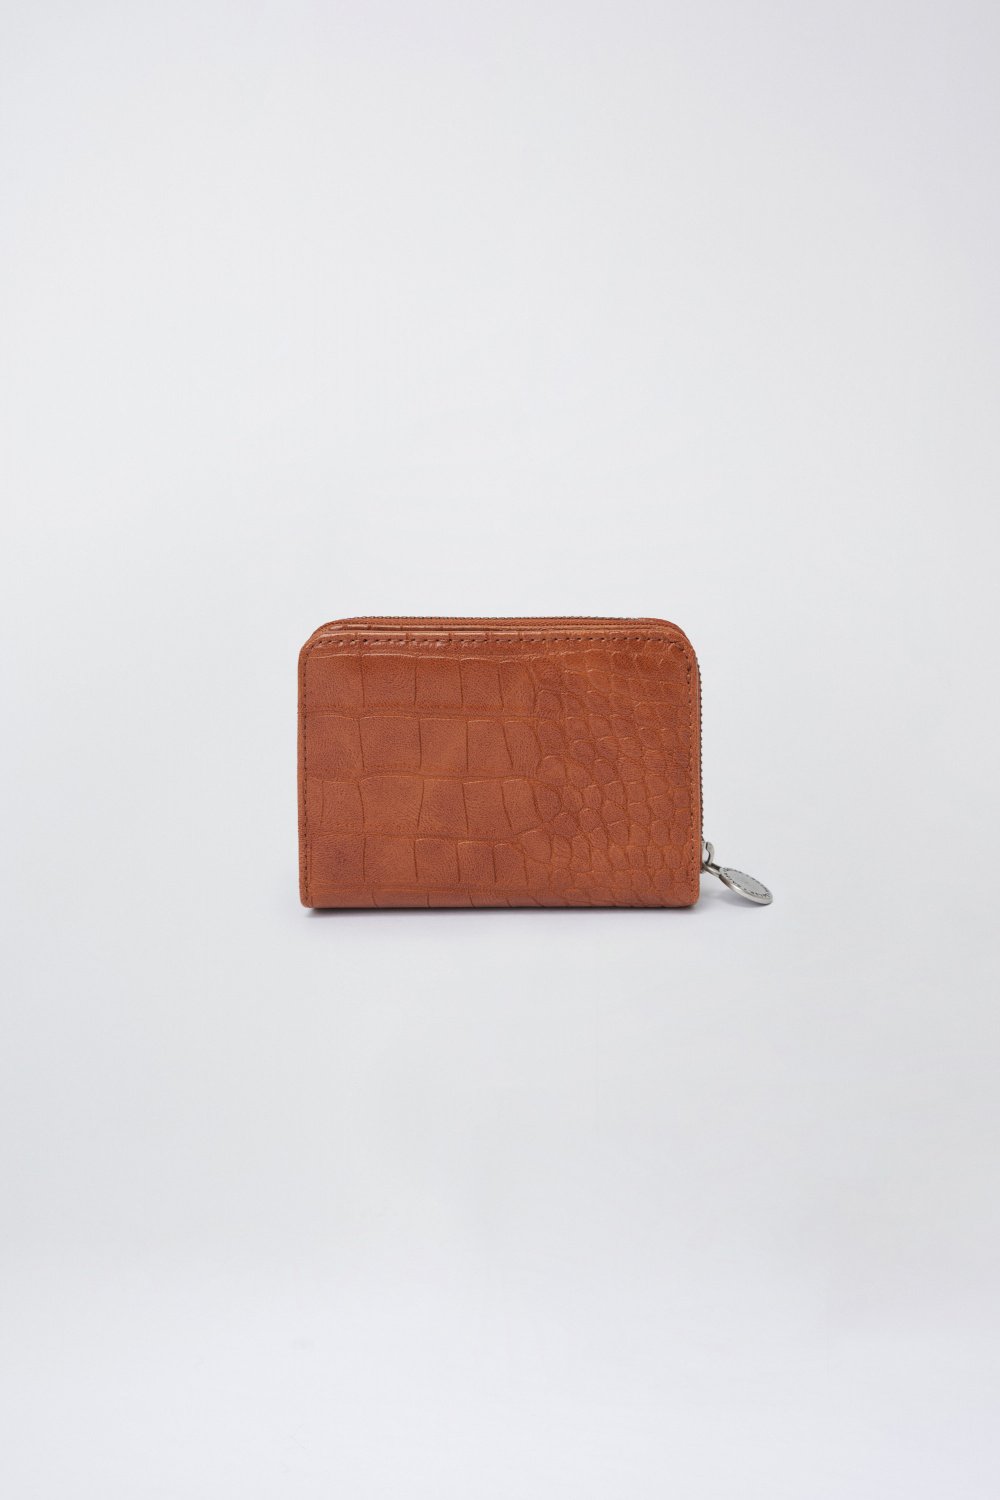 Square shaped wallet and purse - Salsa